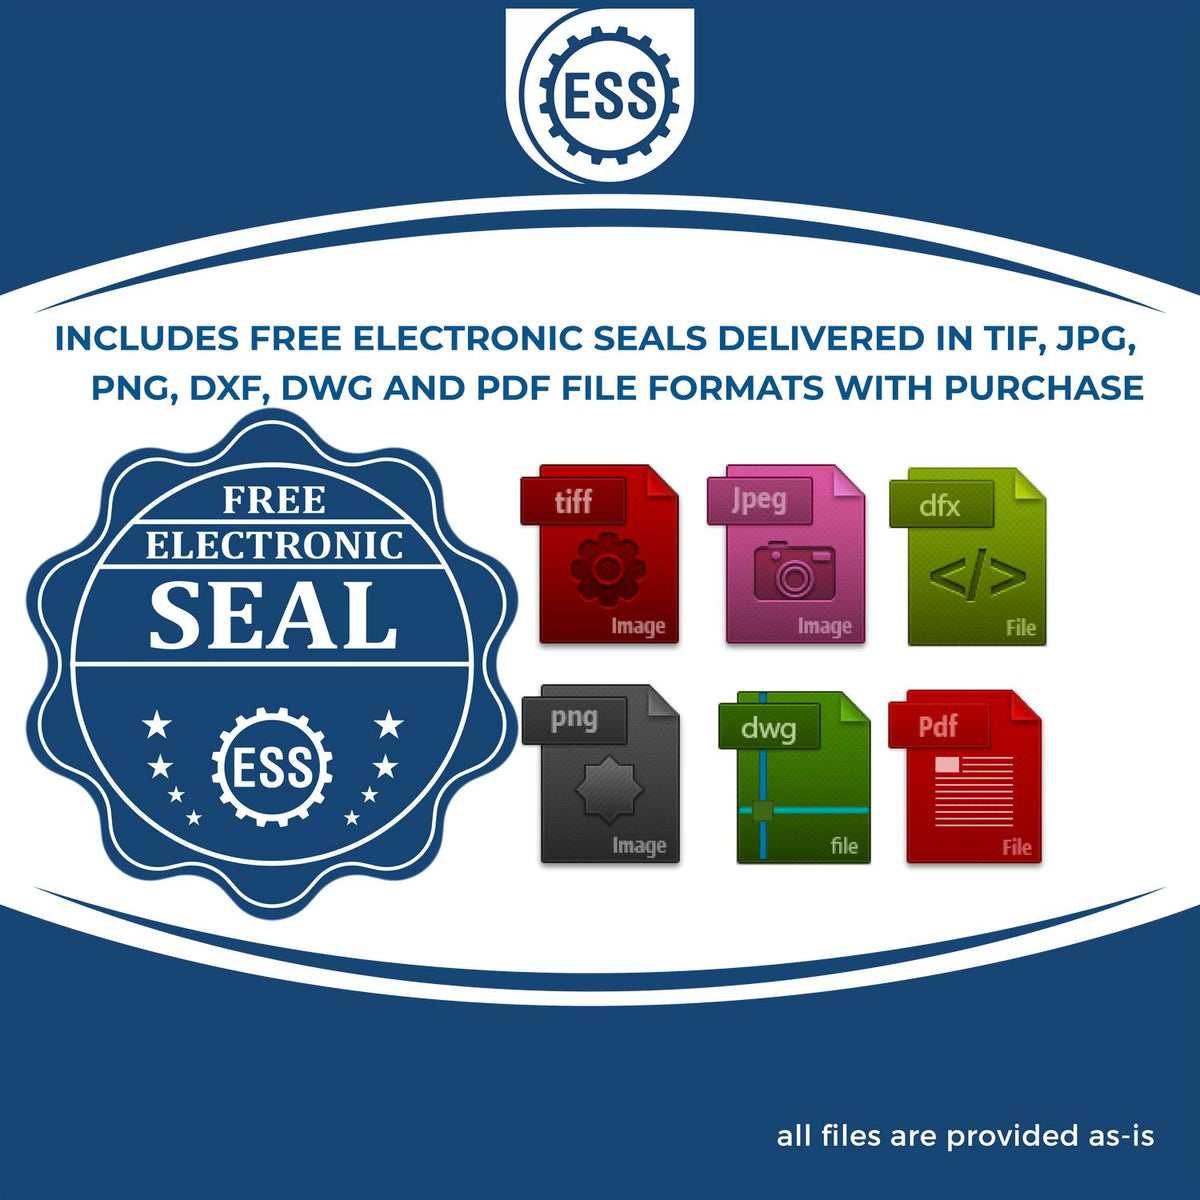 An infographic for the free electronic seal for the Wooden Handle Nevada State Seal Notary Public Stamp illustrating the different file type icons such as DXF, DWG, TIF, JPG and PNG.